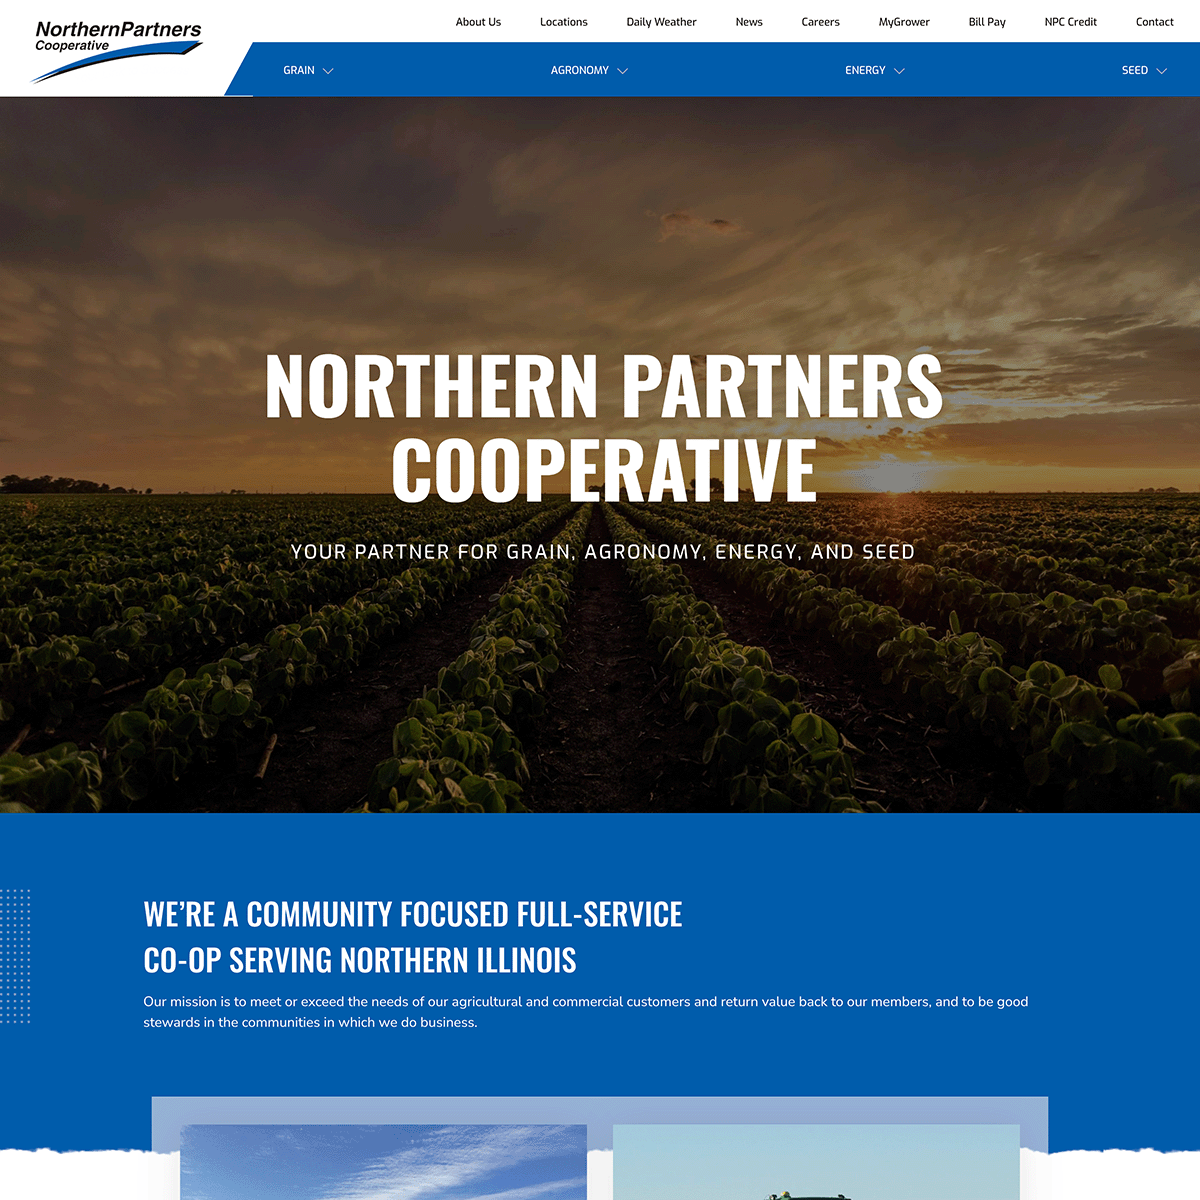 Northern Partners Cooperative